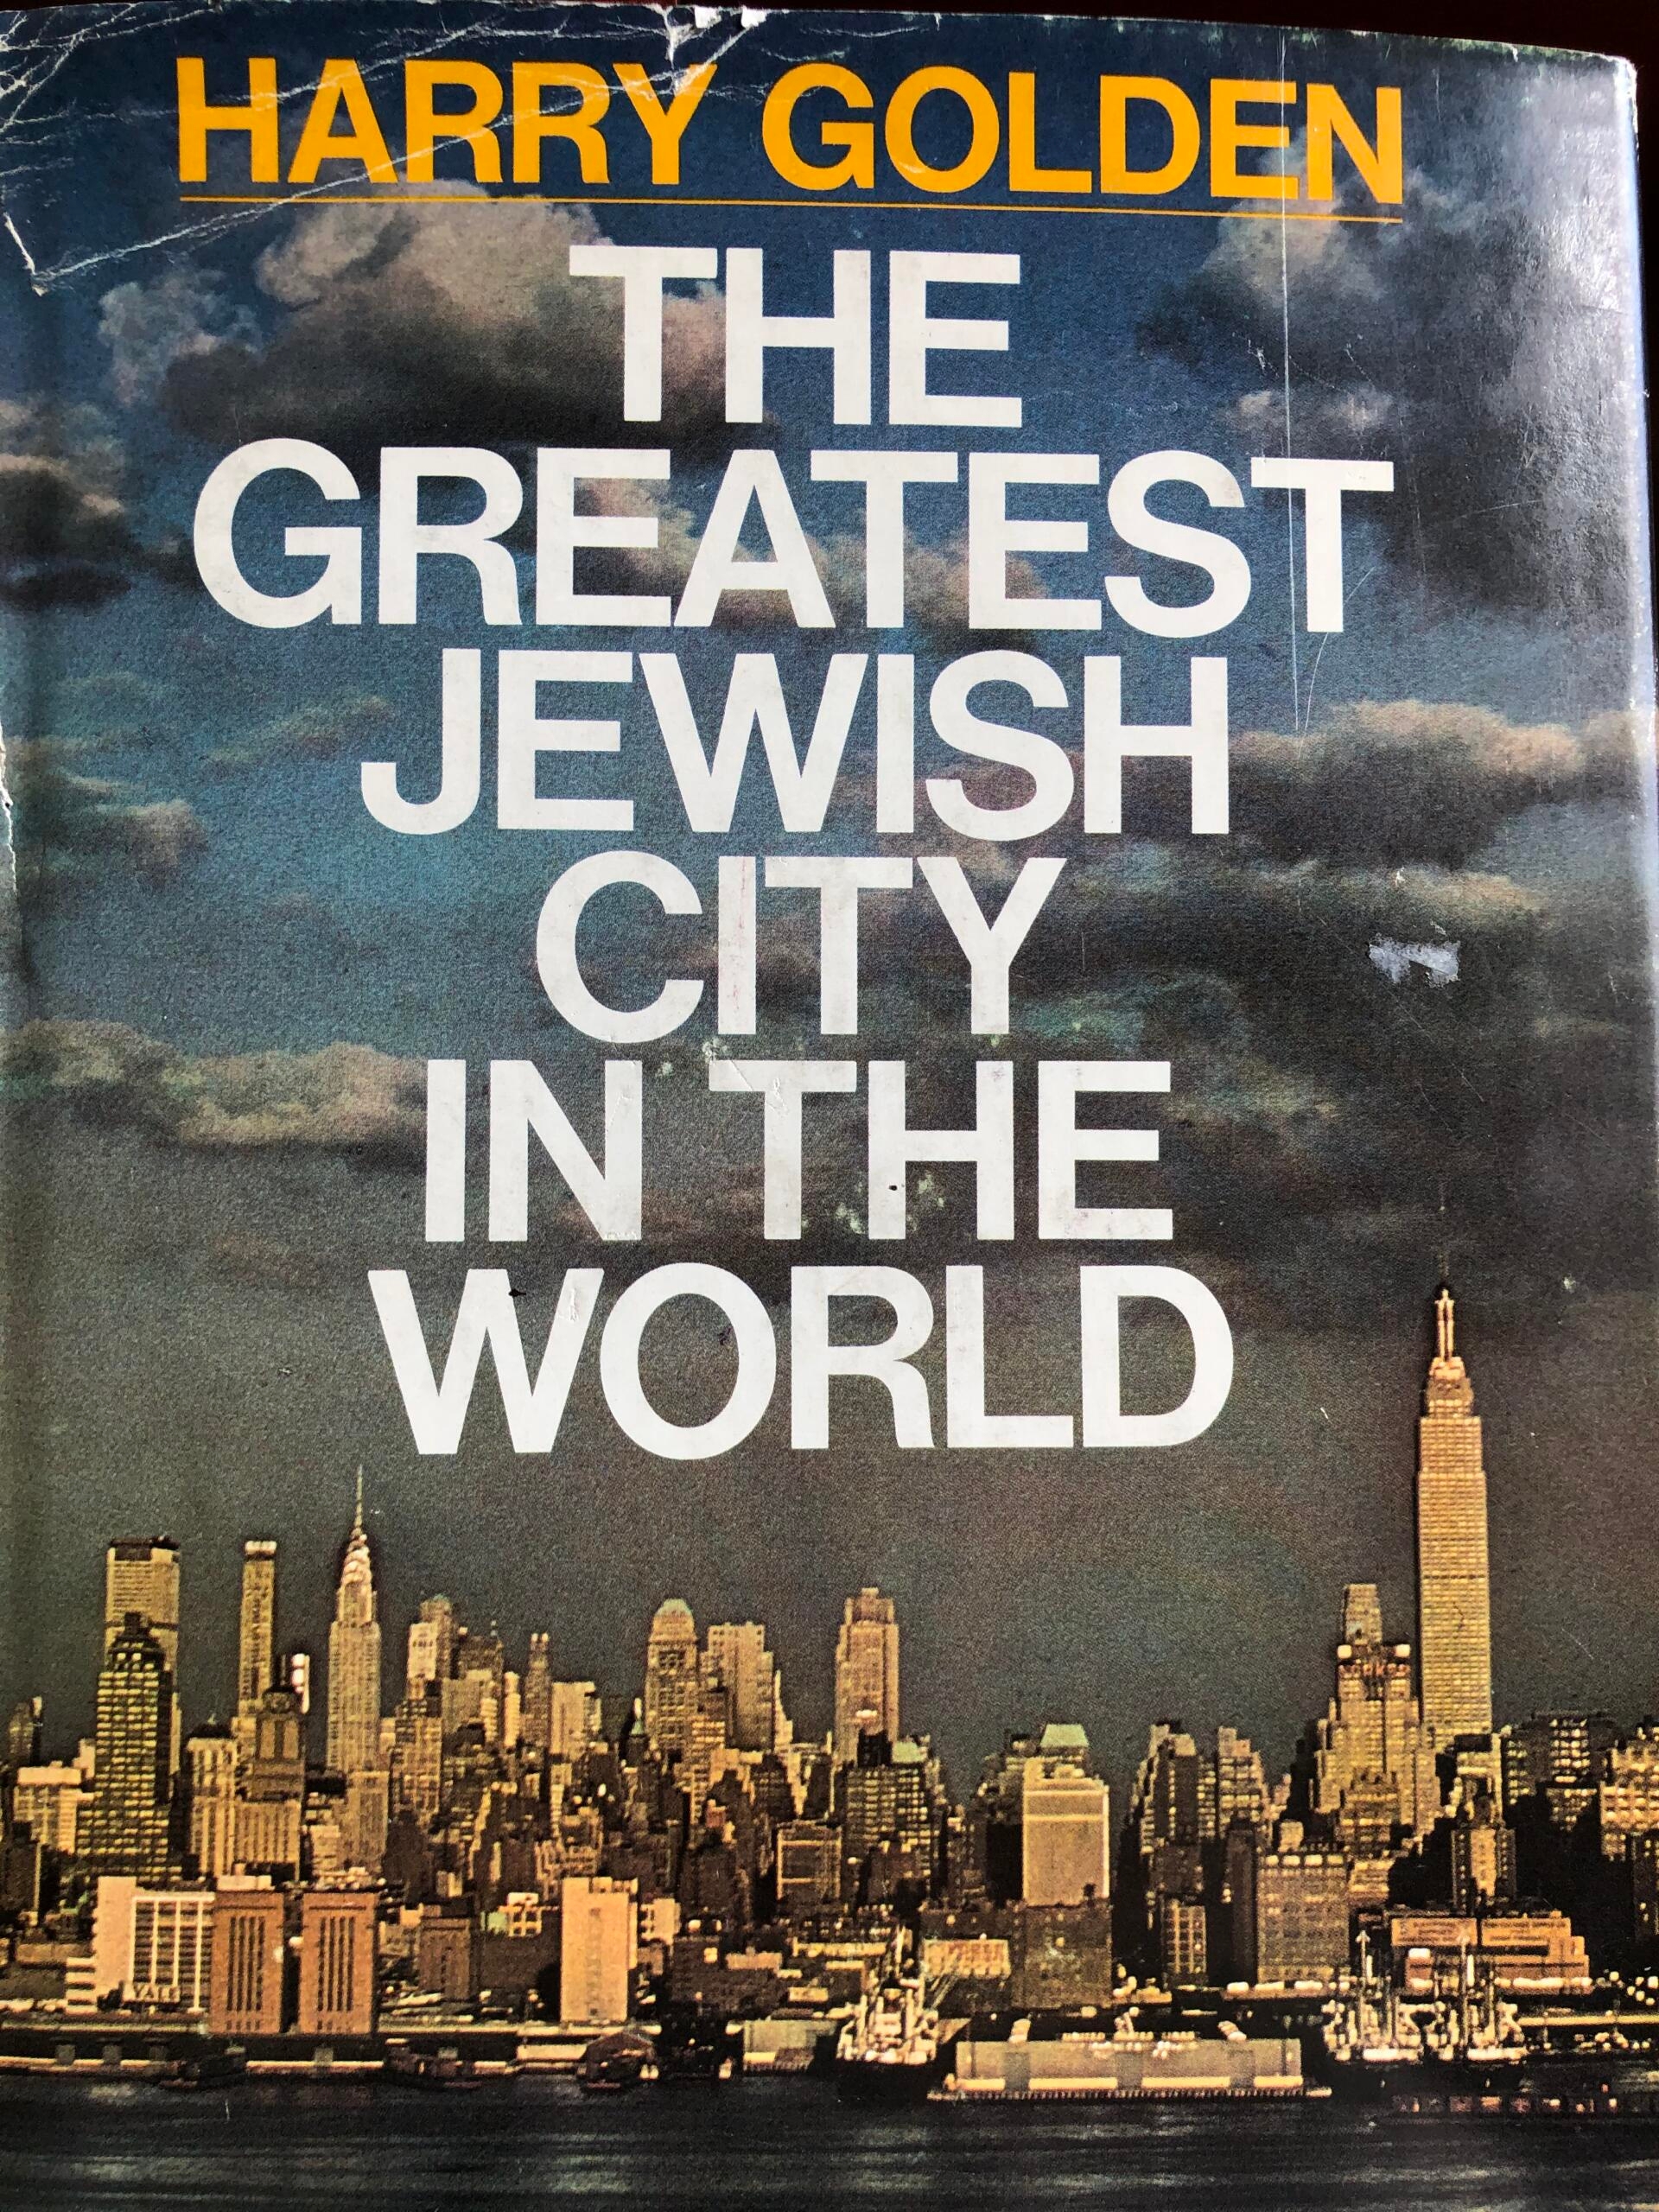 New York: The Greatest Jewish City in the World - Part I of III